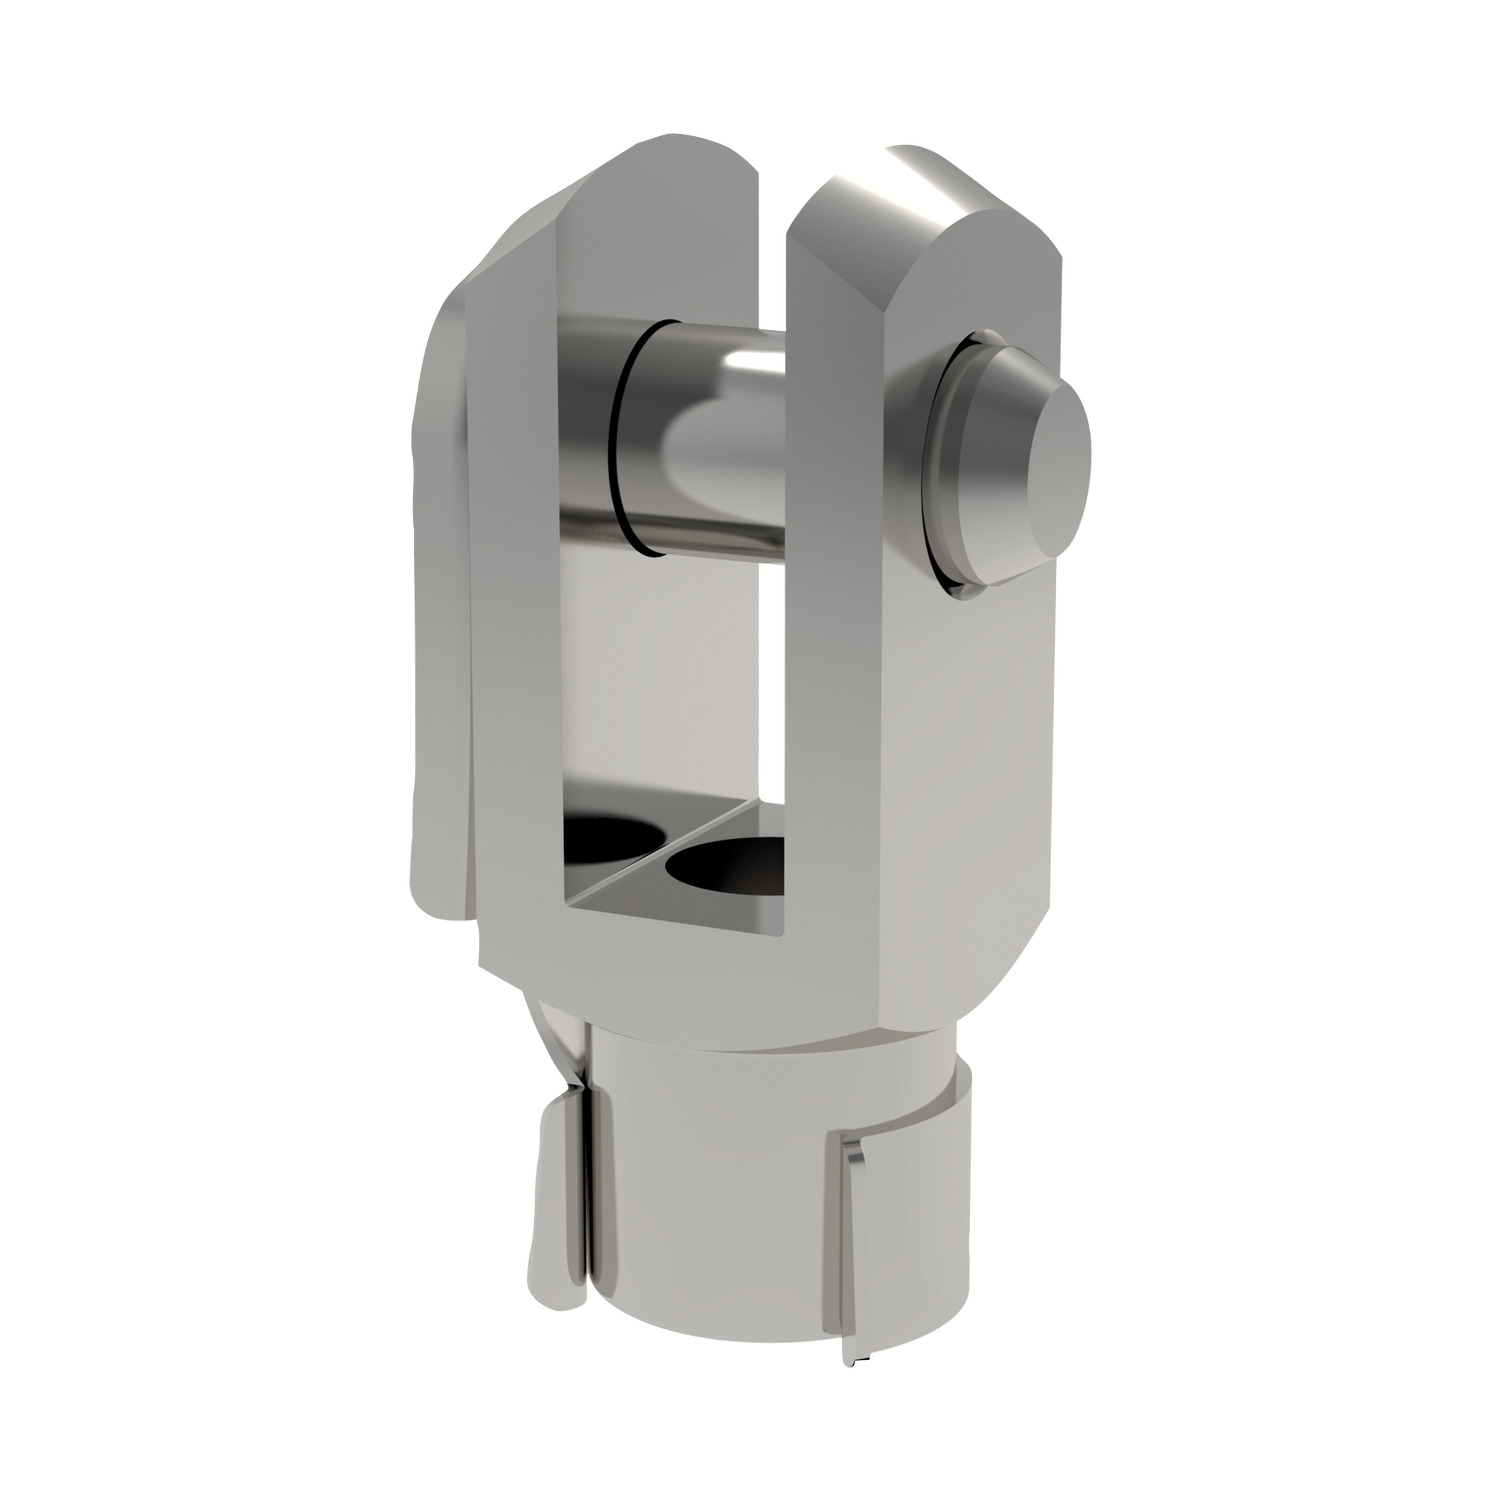 R3401 - LH Clevis Joints with Retention Clip S/S